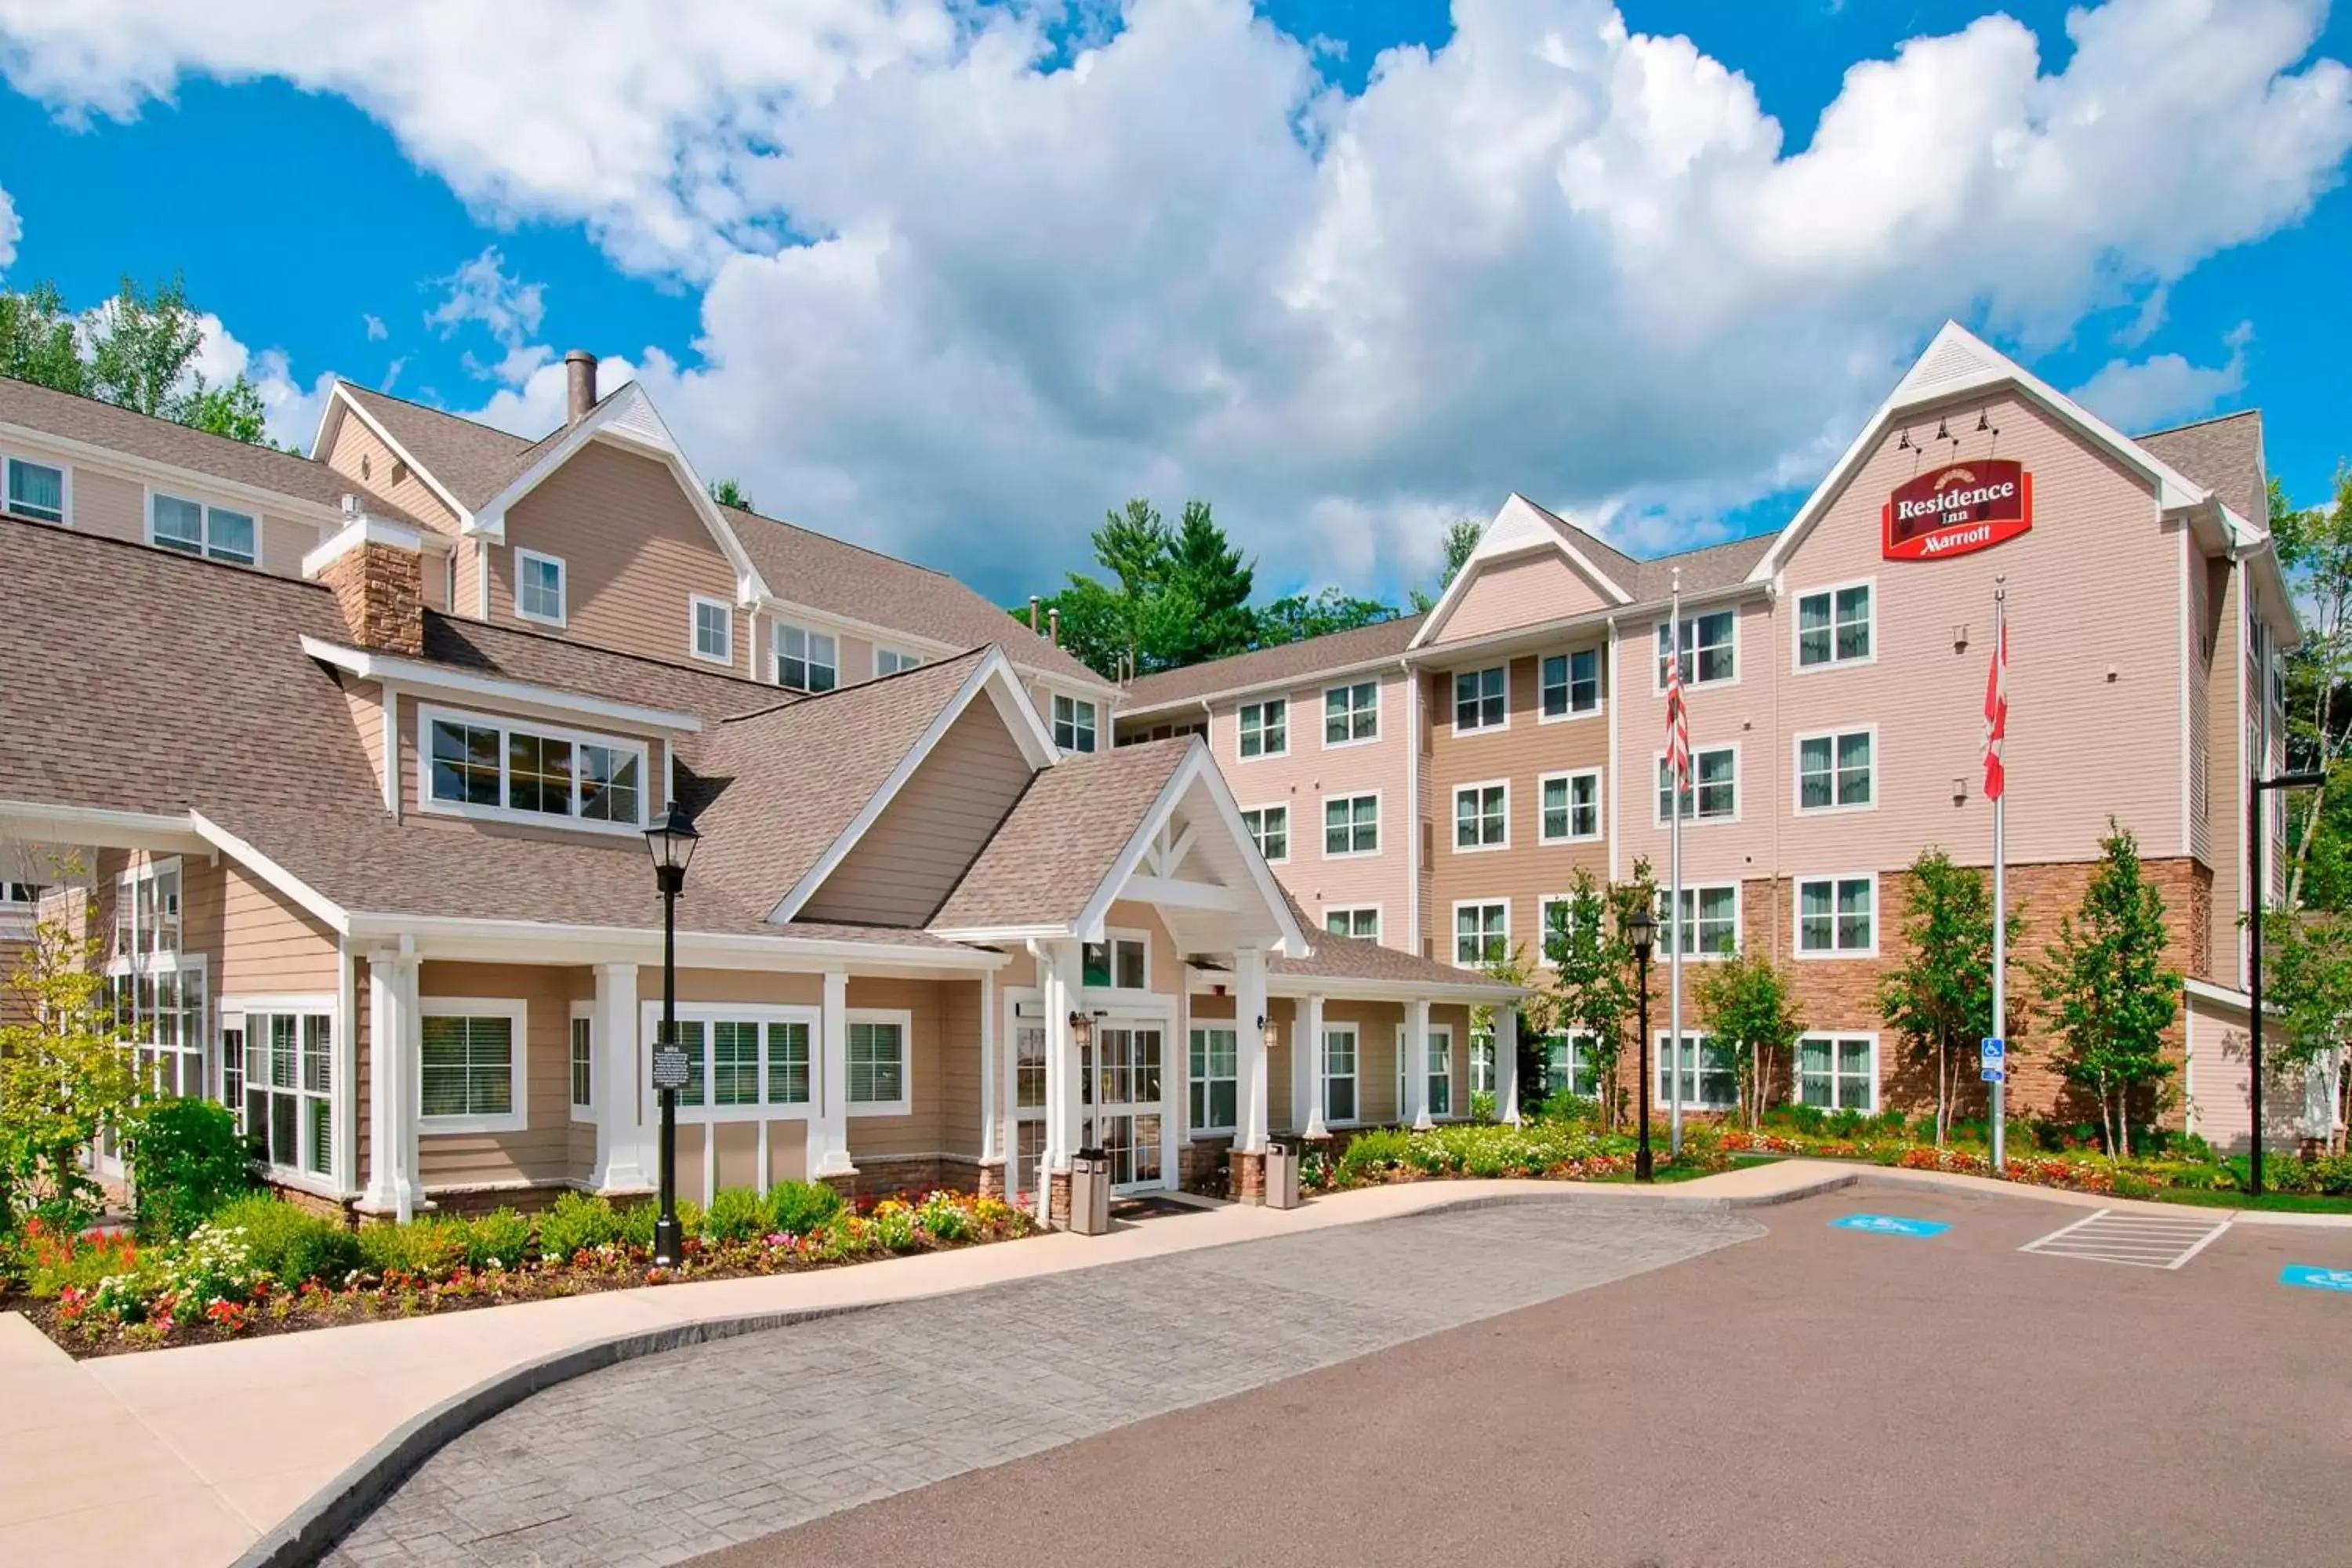 Property Building in Residence Inn by Marriott North Conway